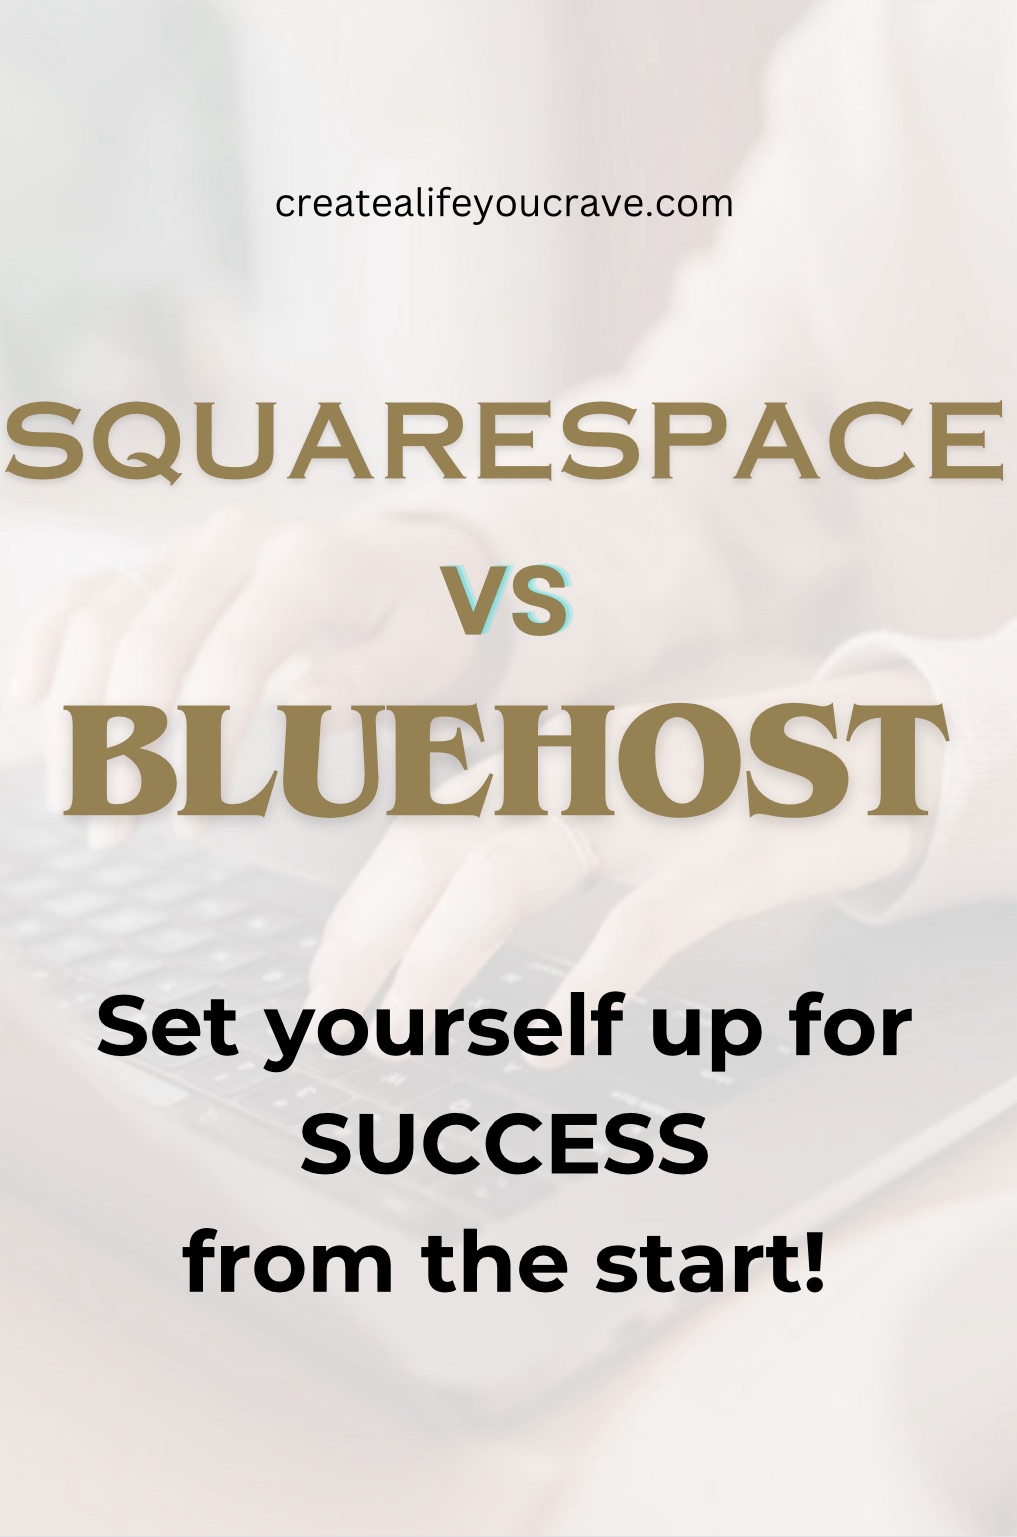 Squarespace Vs Bluehost: Which is Better?